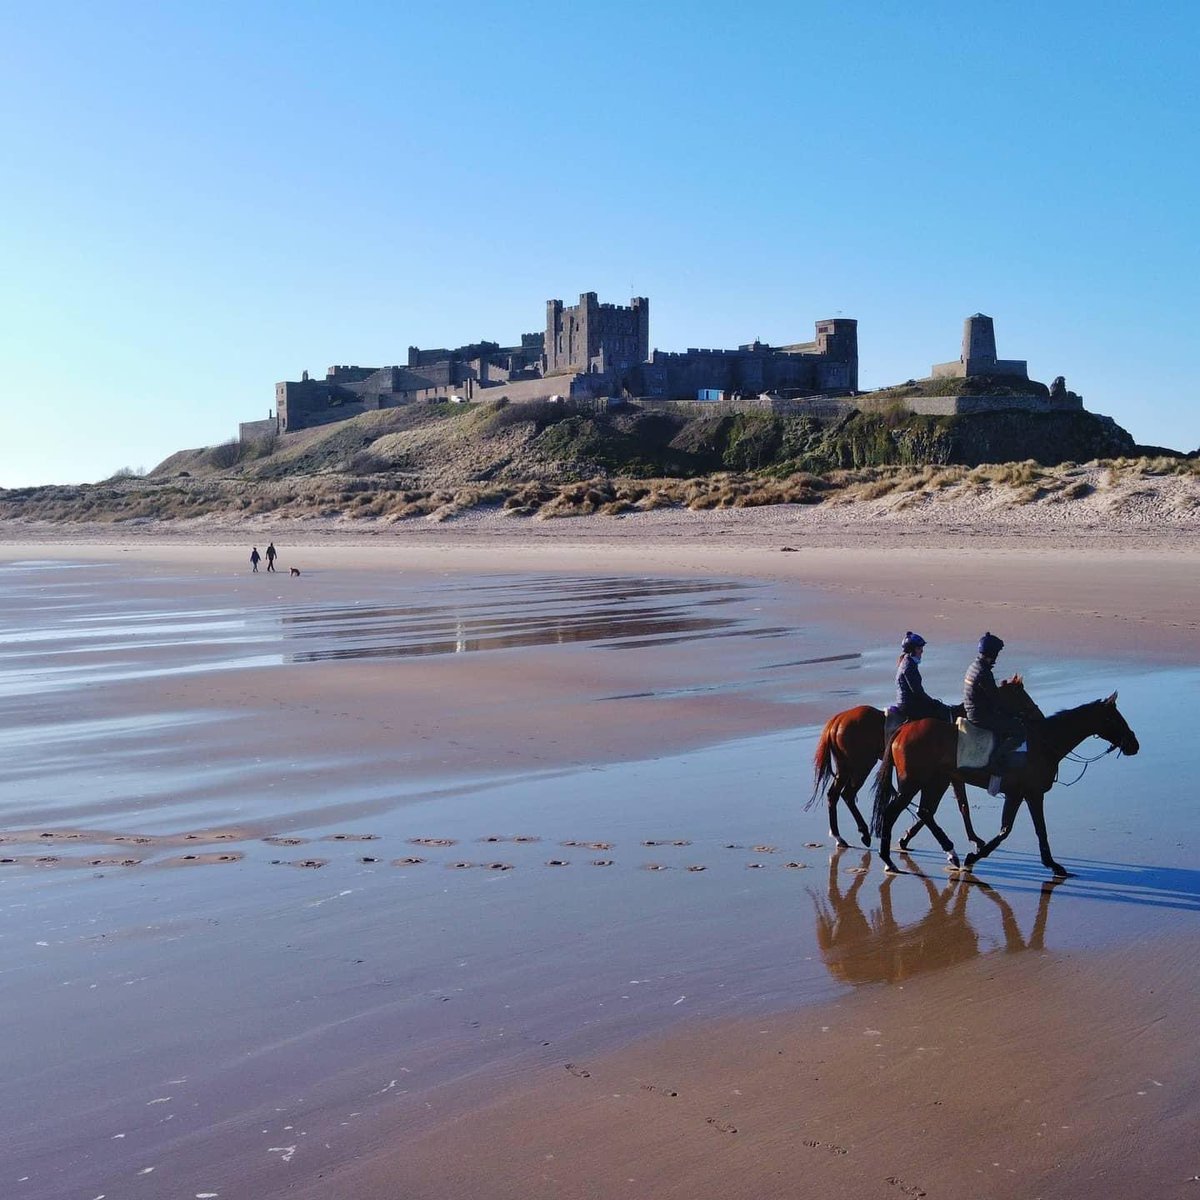 Eagle & Des exercising on Bamburgh beach this morning! Photo by Jamie Dobson, he also took some incredible drone footage which will be posted soon! #StunningDay #ThanksJamie #TeamWork #Bamburgh